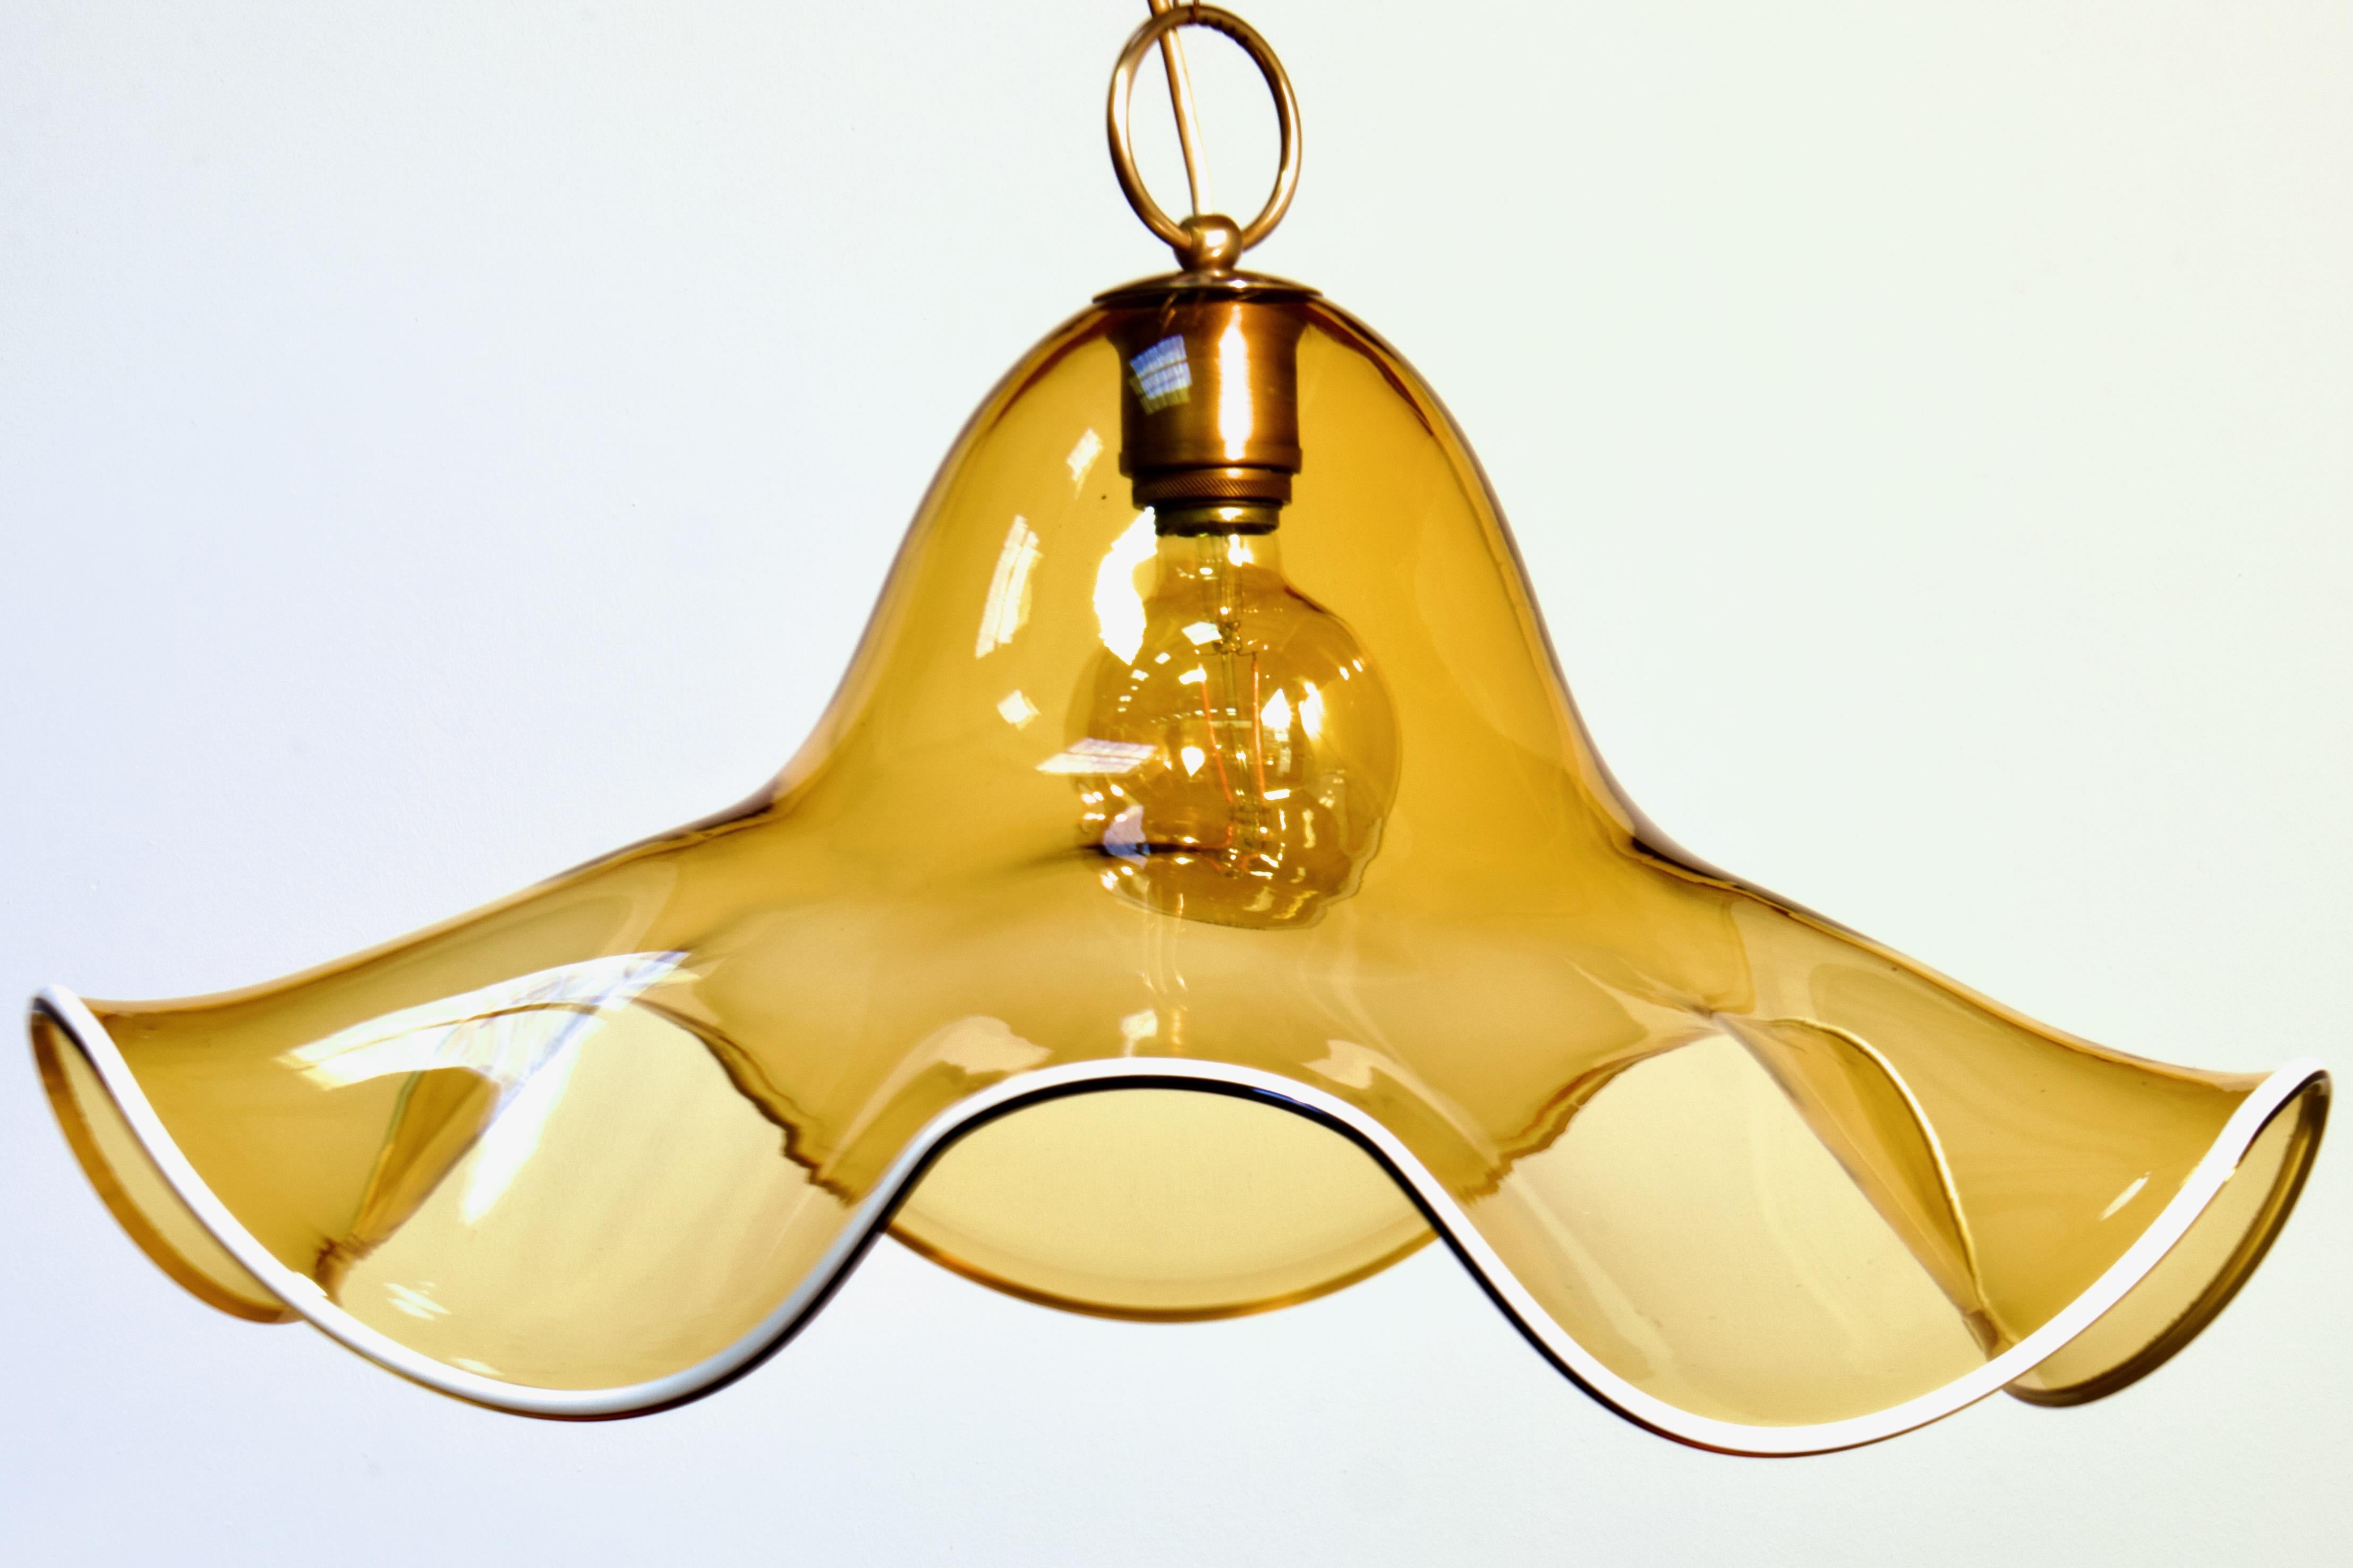 Large (24.5 inch diameter) 1970s Italian Mid-Century Organic Modern floral pendant light by La Murrina from Murano. 

Formed from one large thick sheet of hand made blow transparent glass, with a gorgeous amber tint. The sheet of glass swoops and